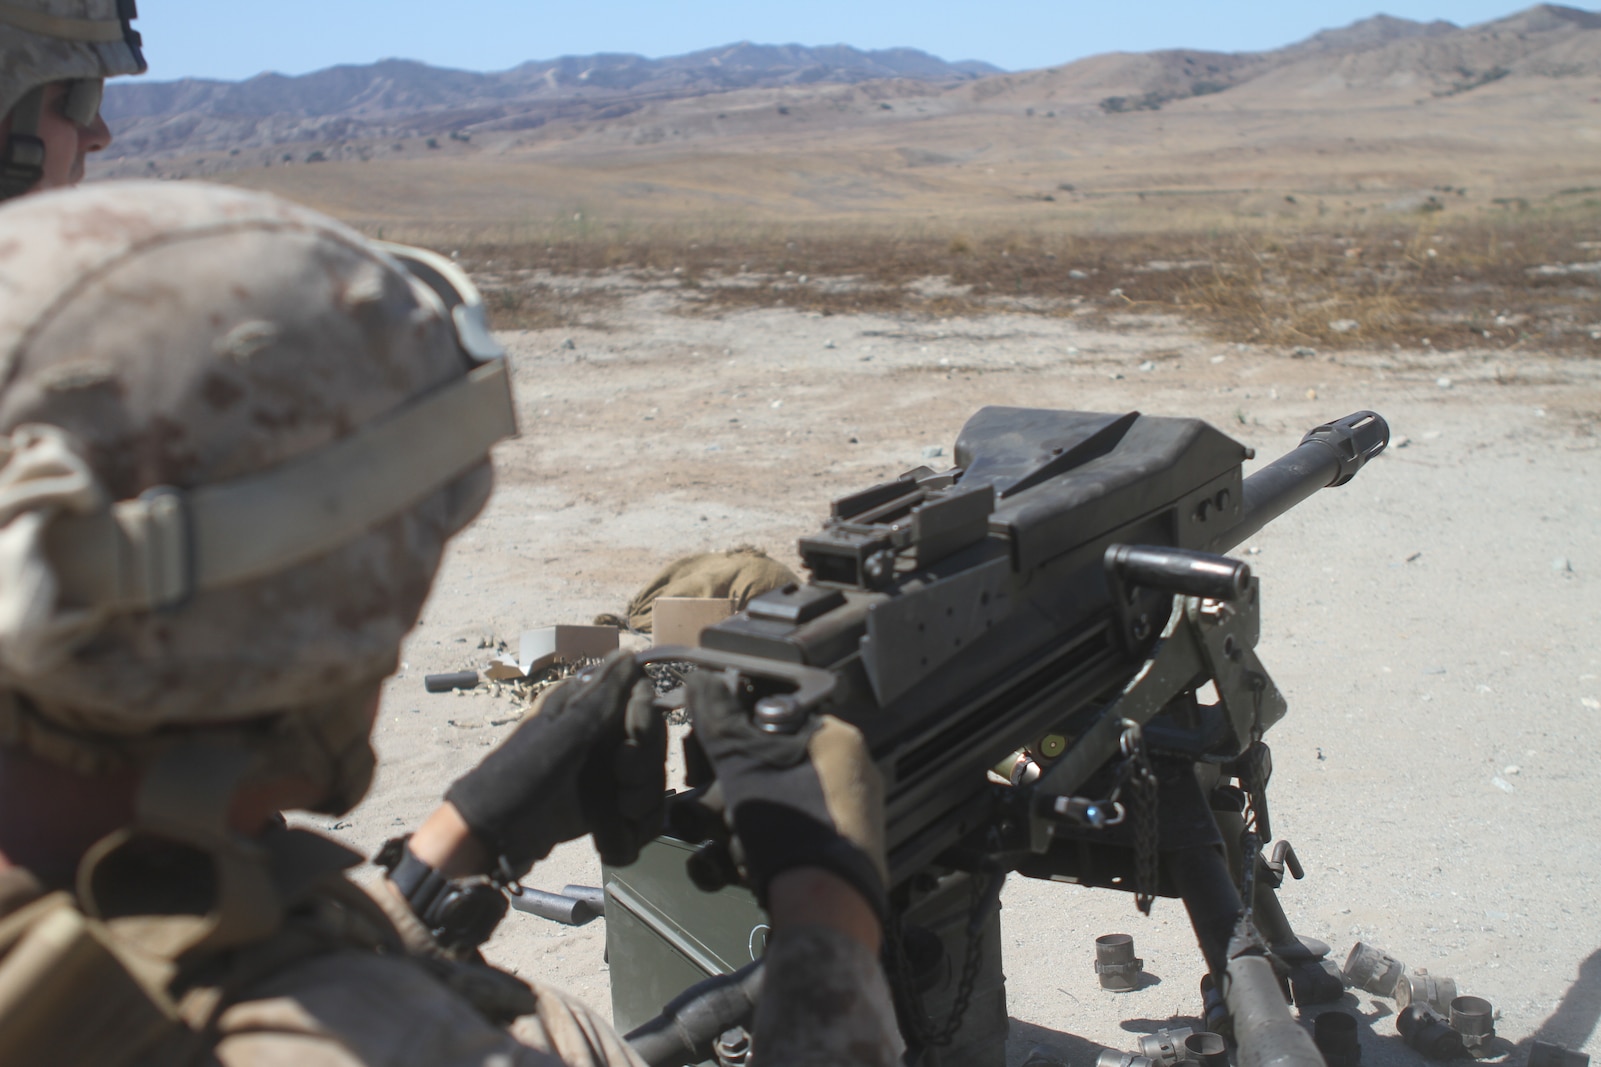 Marines with Ammo Company, 1st Supply Battalion, operate an Mk19 automatic grenade launcher aboard Marine Corps Base Camp Pendleton, Calif., Sept. 17, 2014. The Marines were required to engage simulated targets while conducting the basic machine gun course. The live-fire ranges were part of an annual training package to keep the Marines confident and proficient with each weapon system.